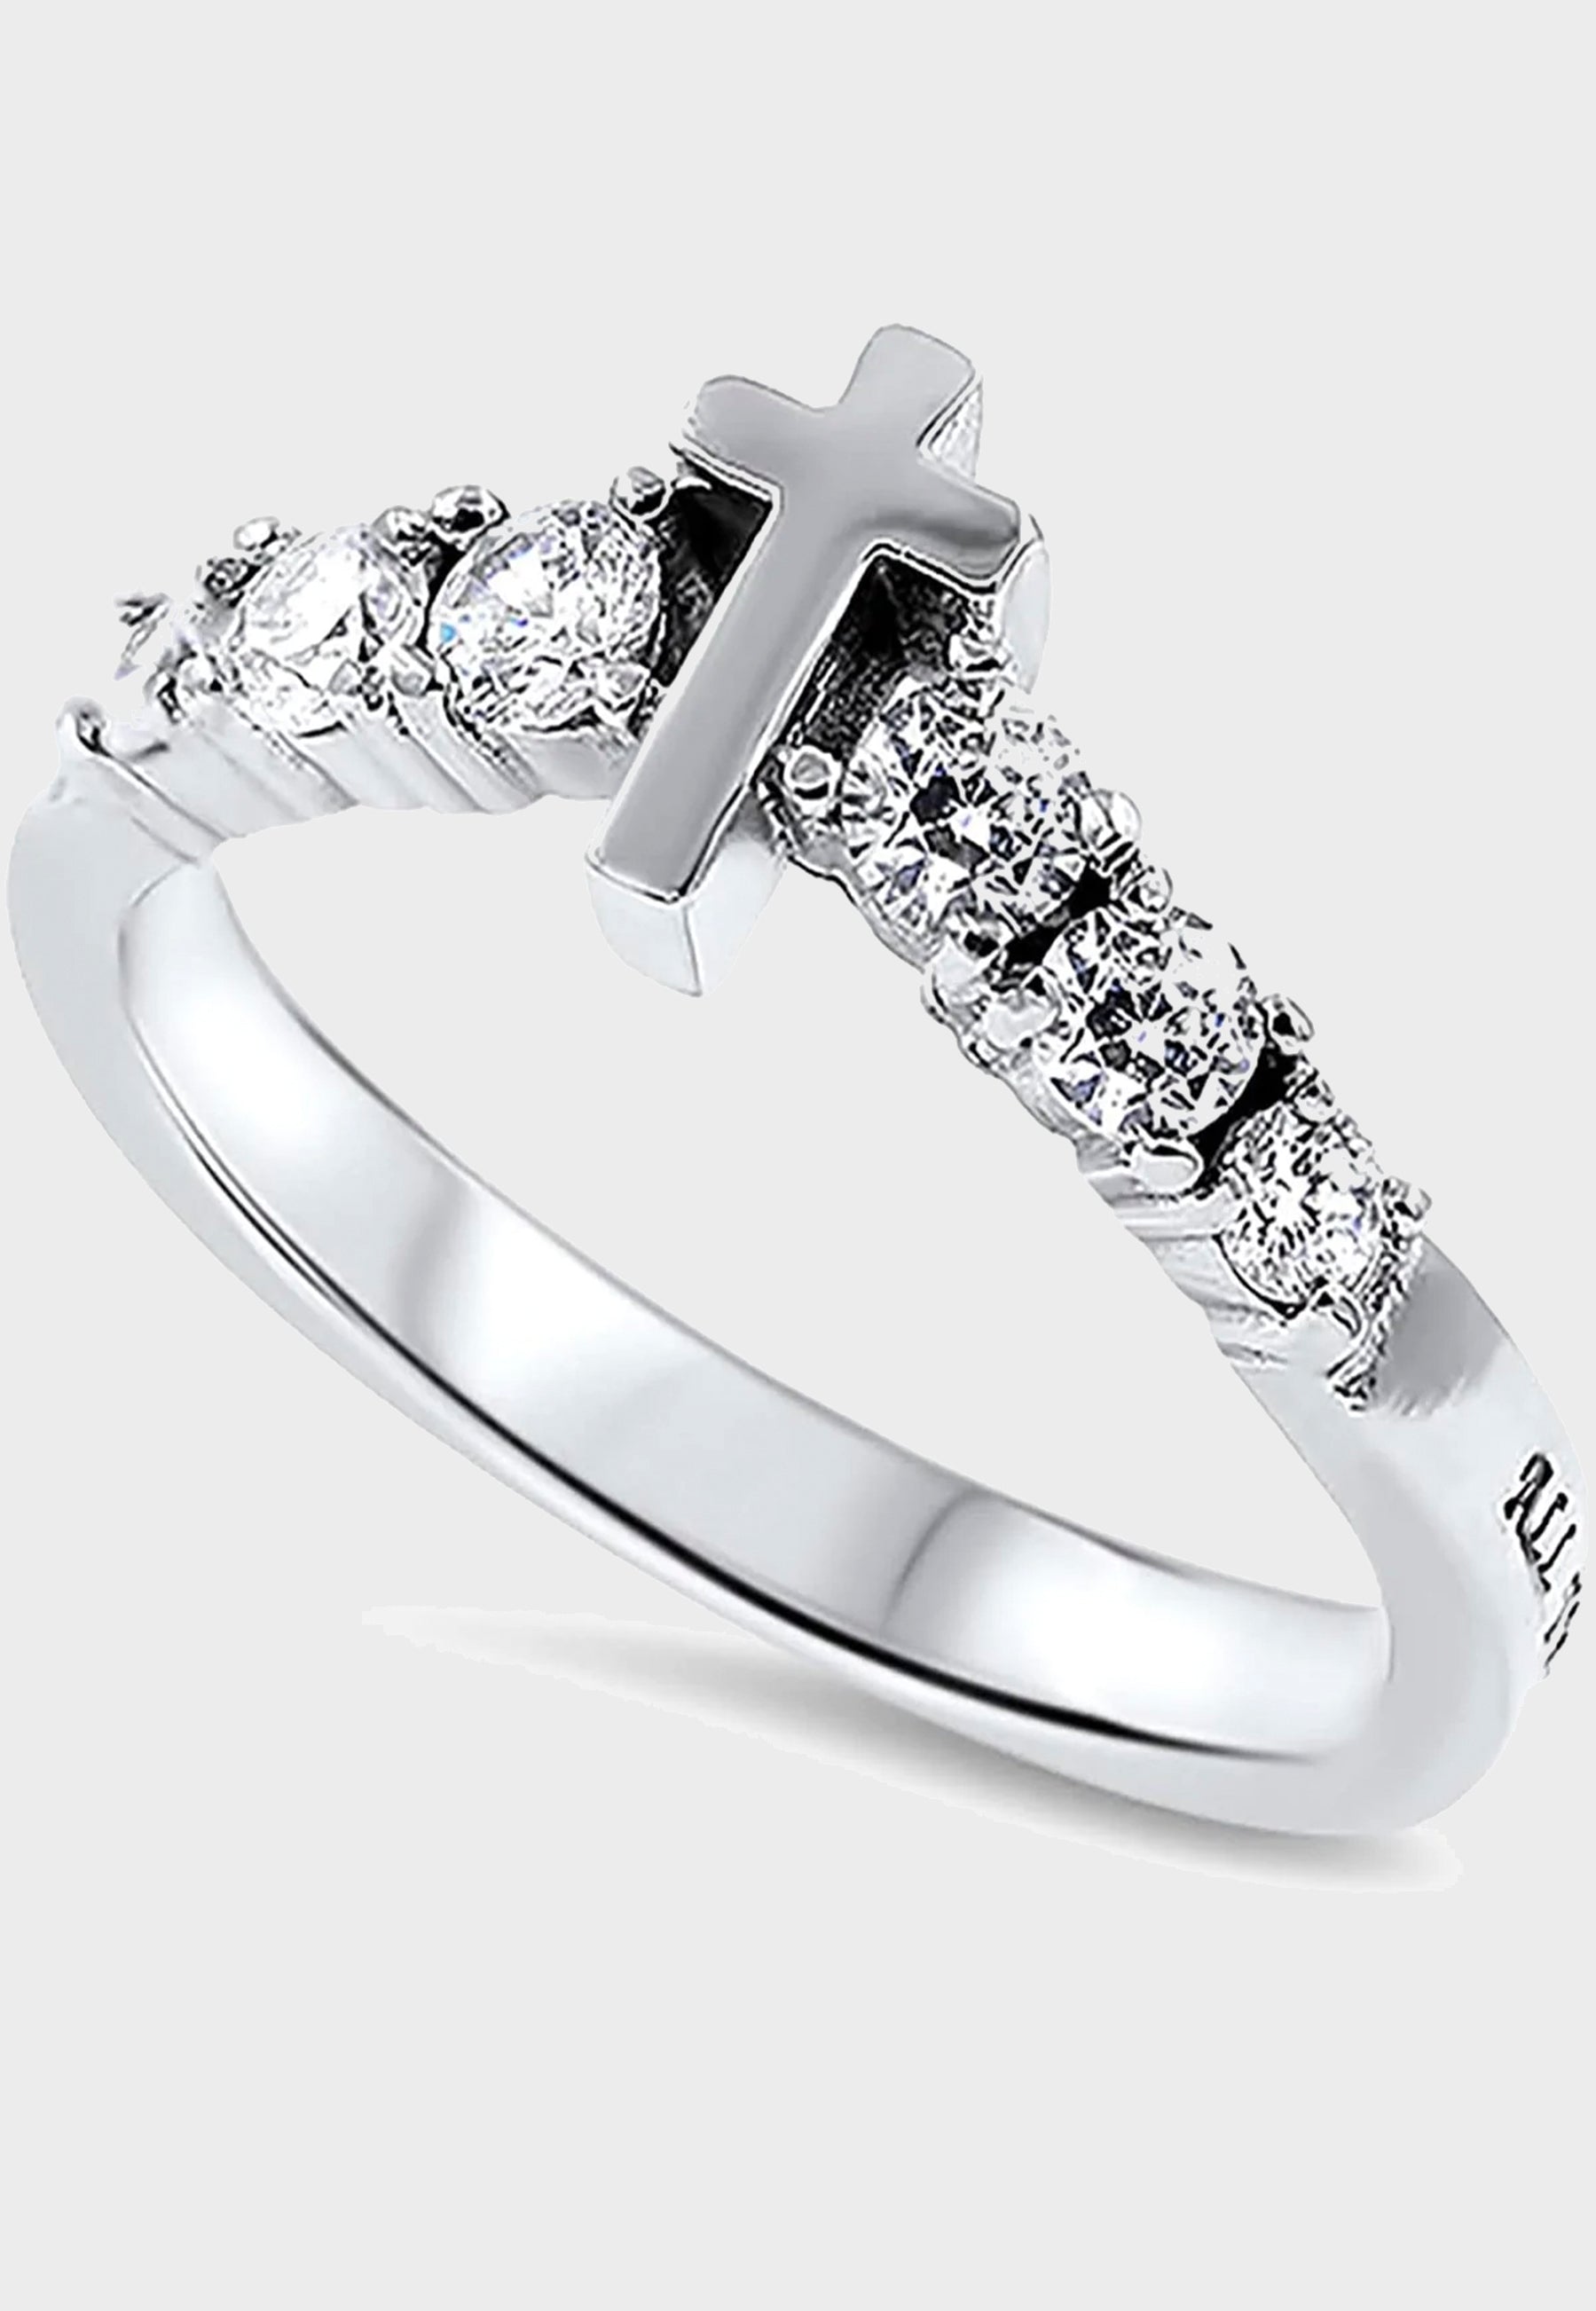 Women's polished steel Christian ring with cross